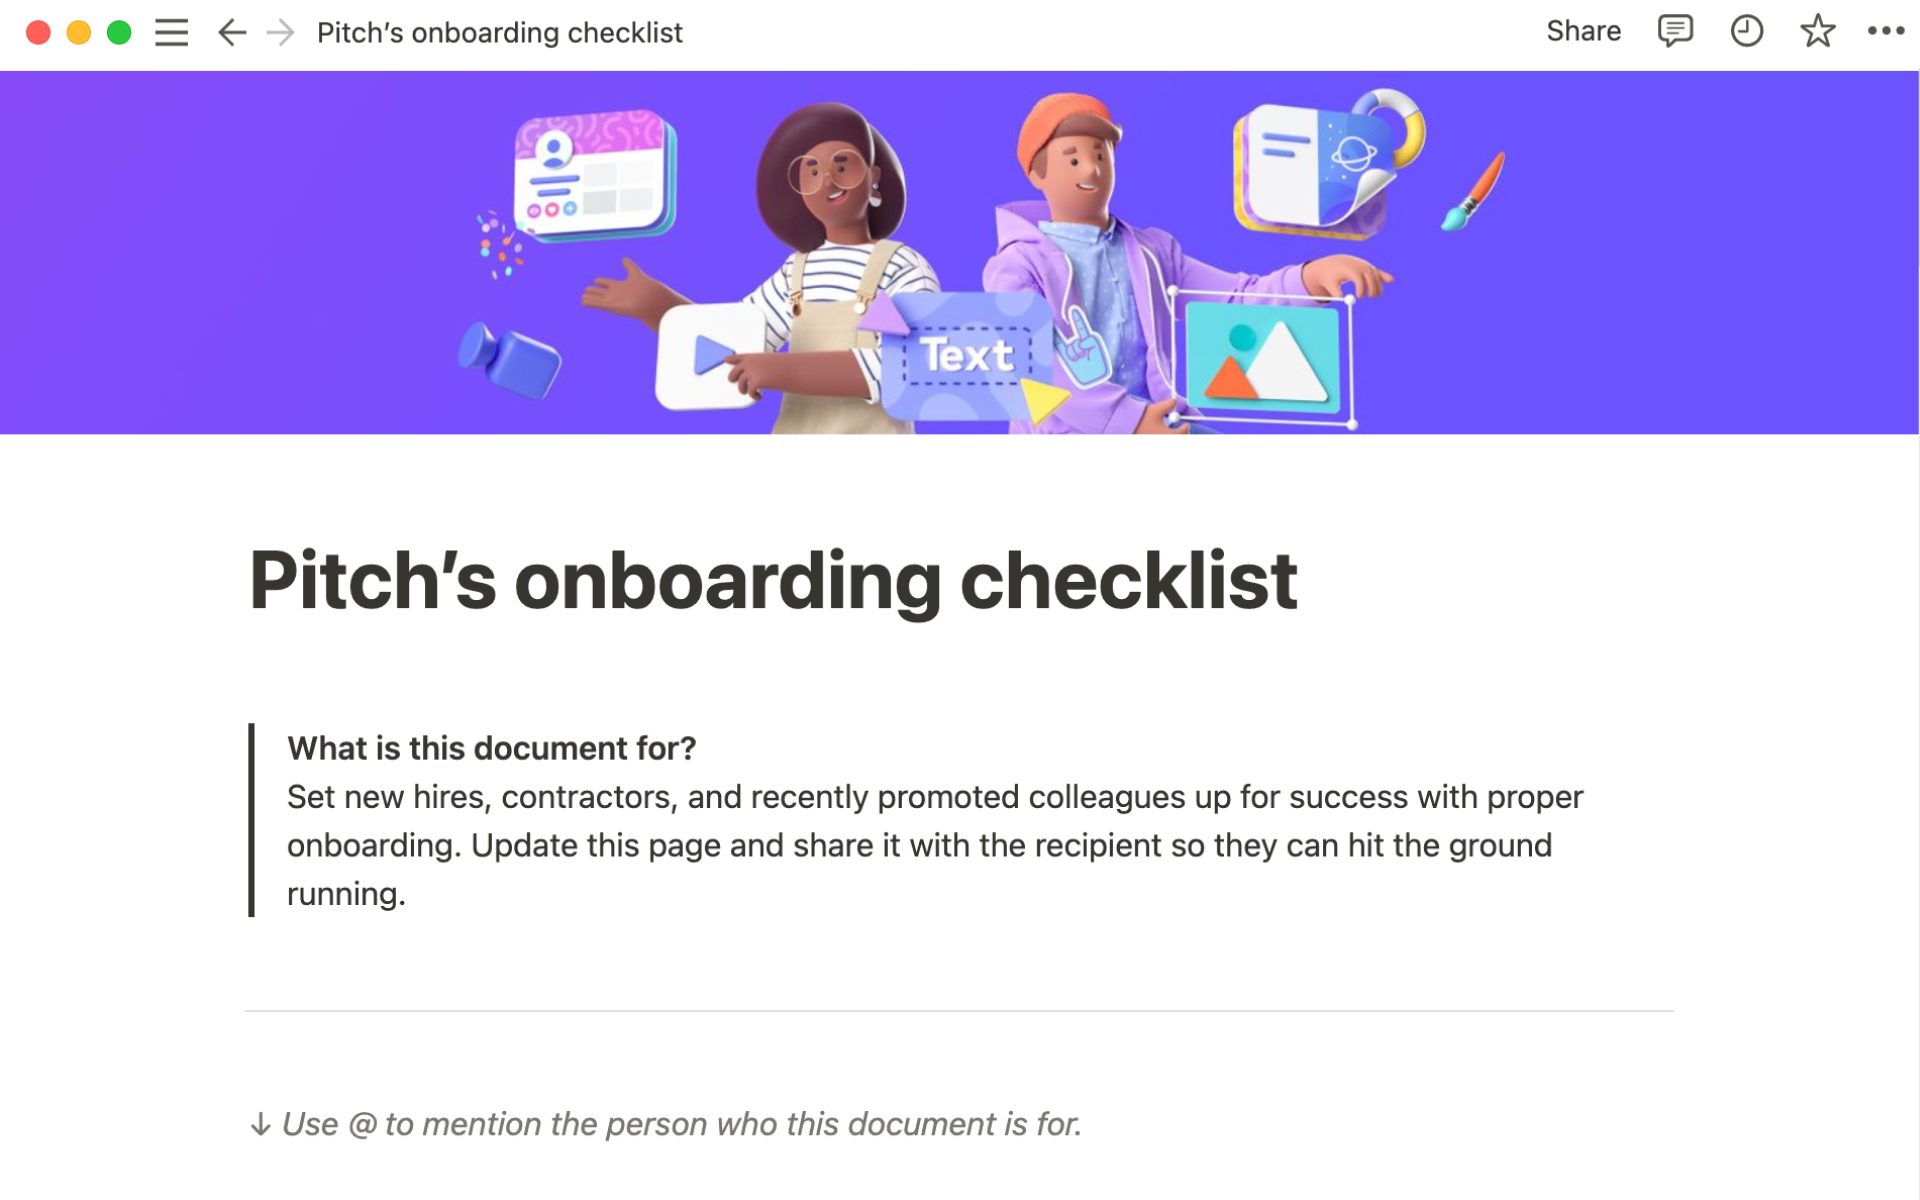 Set new hires, contractors, and recently promoted colleagues up for success with proper onboarding.